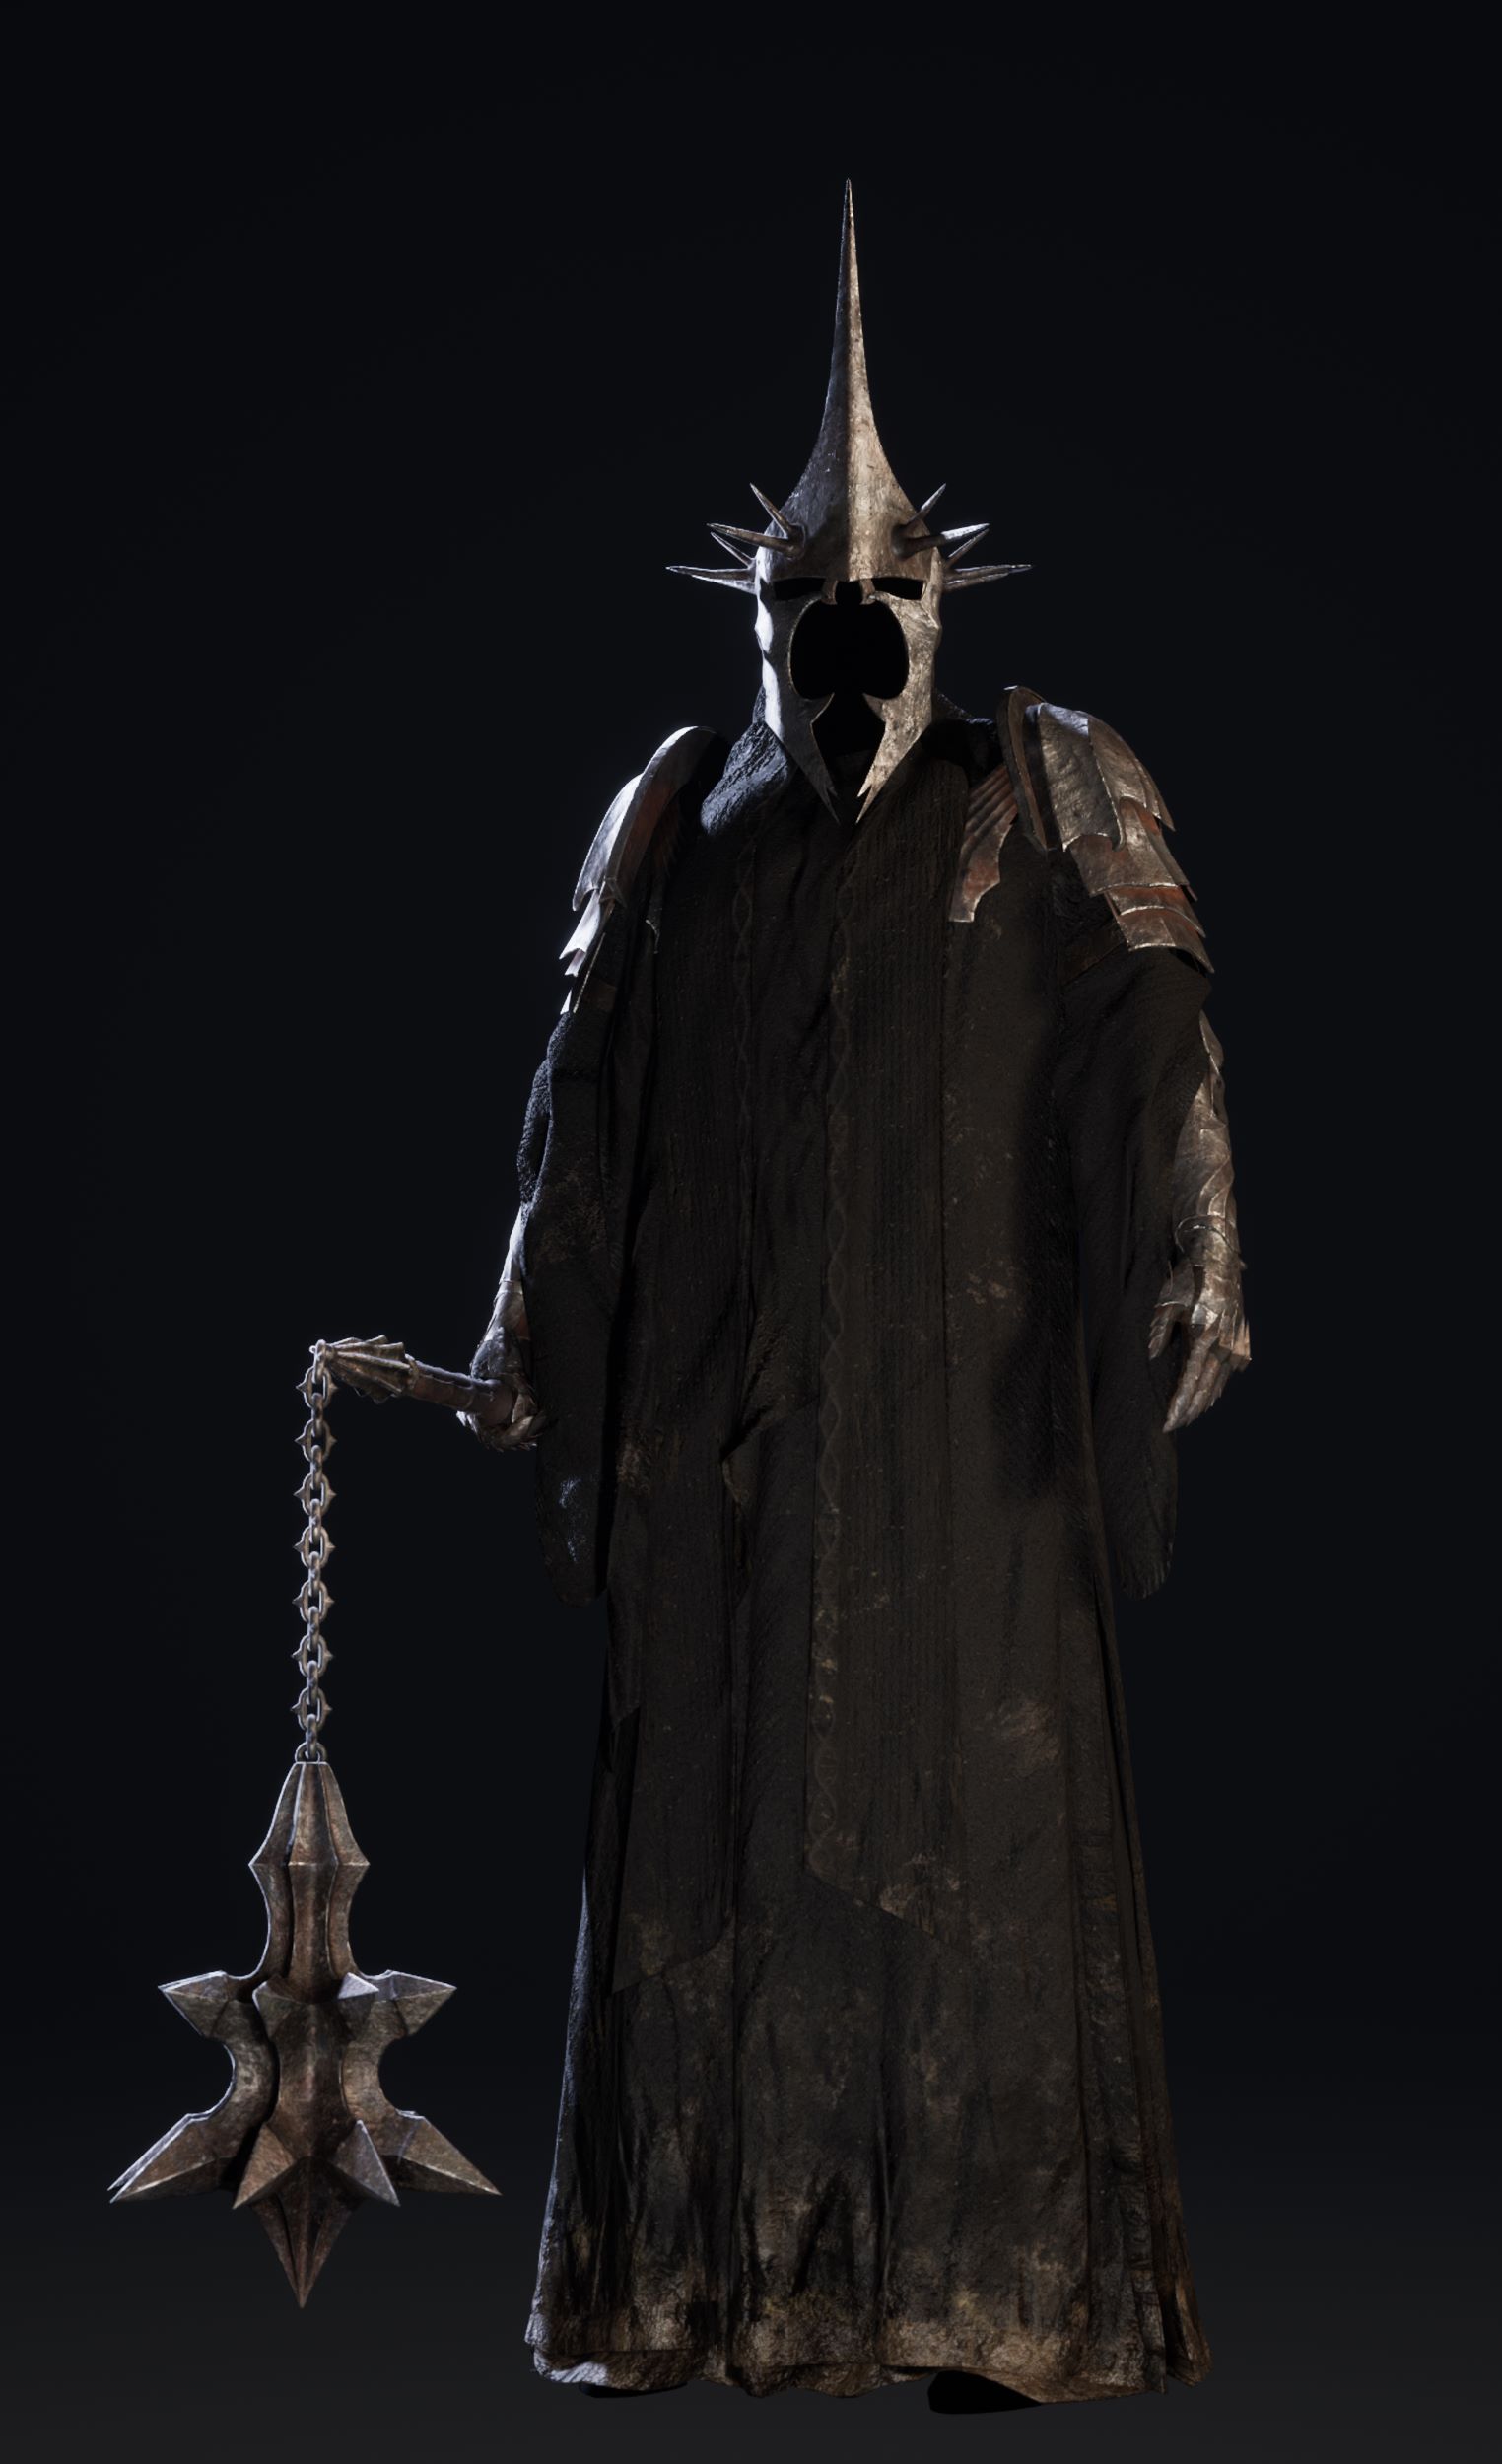 The Witch King. A figure in tattered black robes. He wears old iron armour on his arms and crown like helmet. He holds a large flail in his right hand.